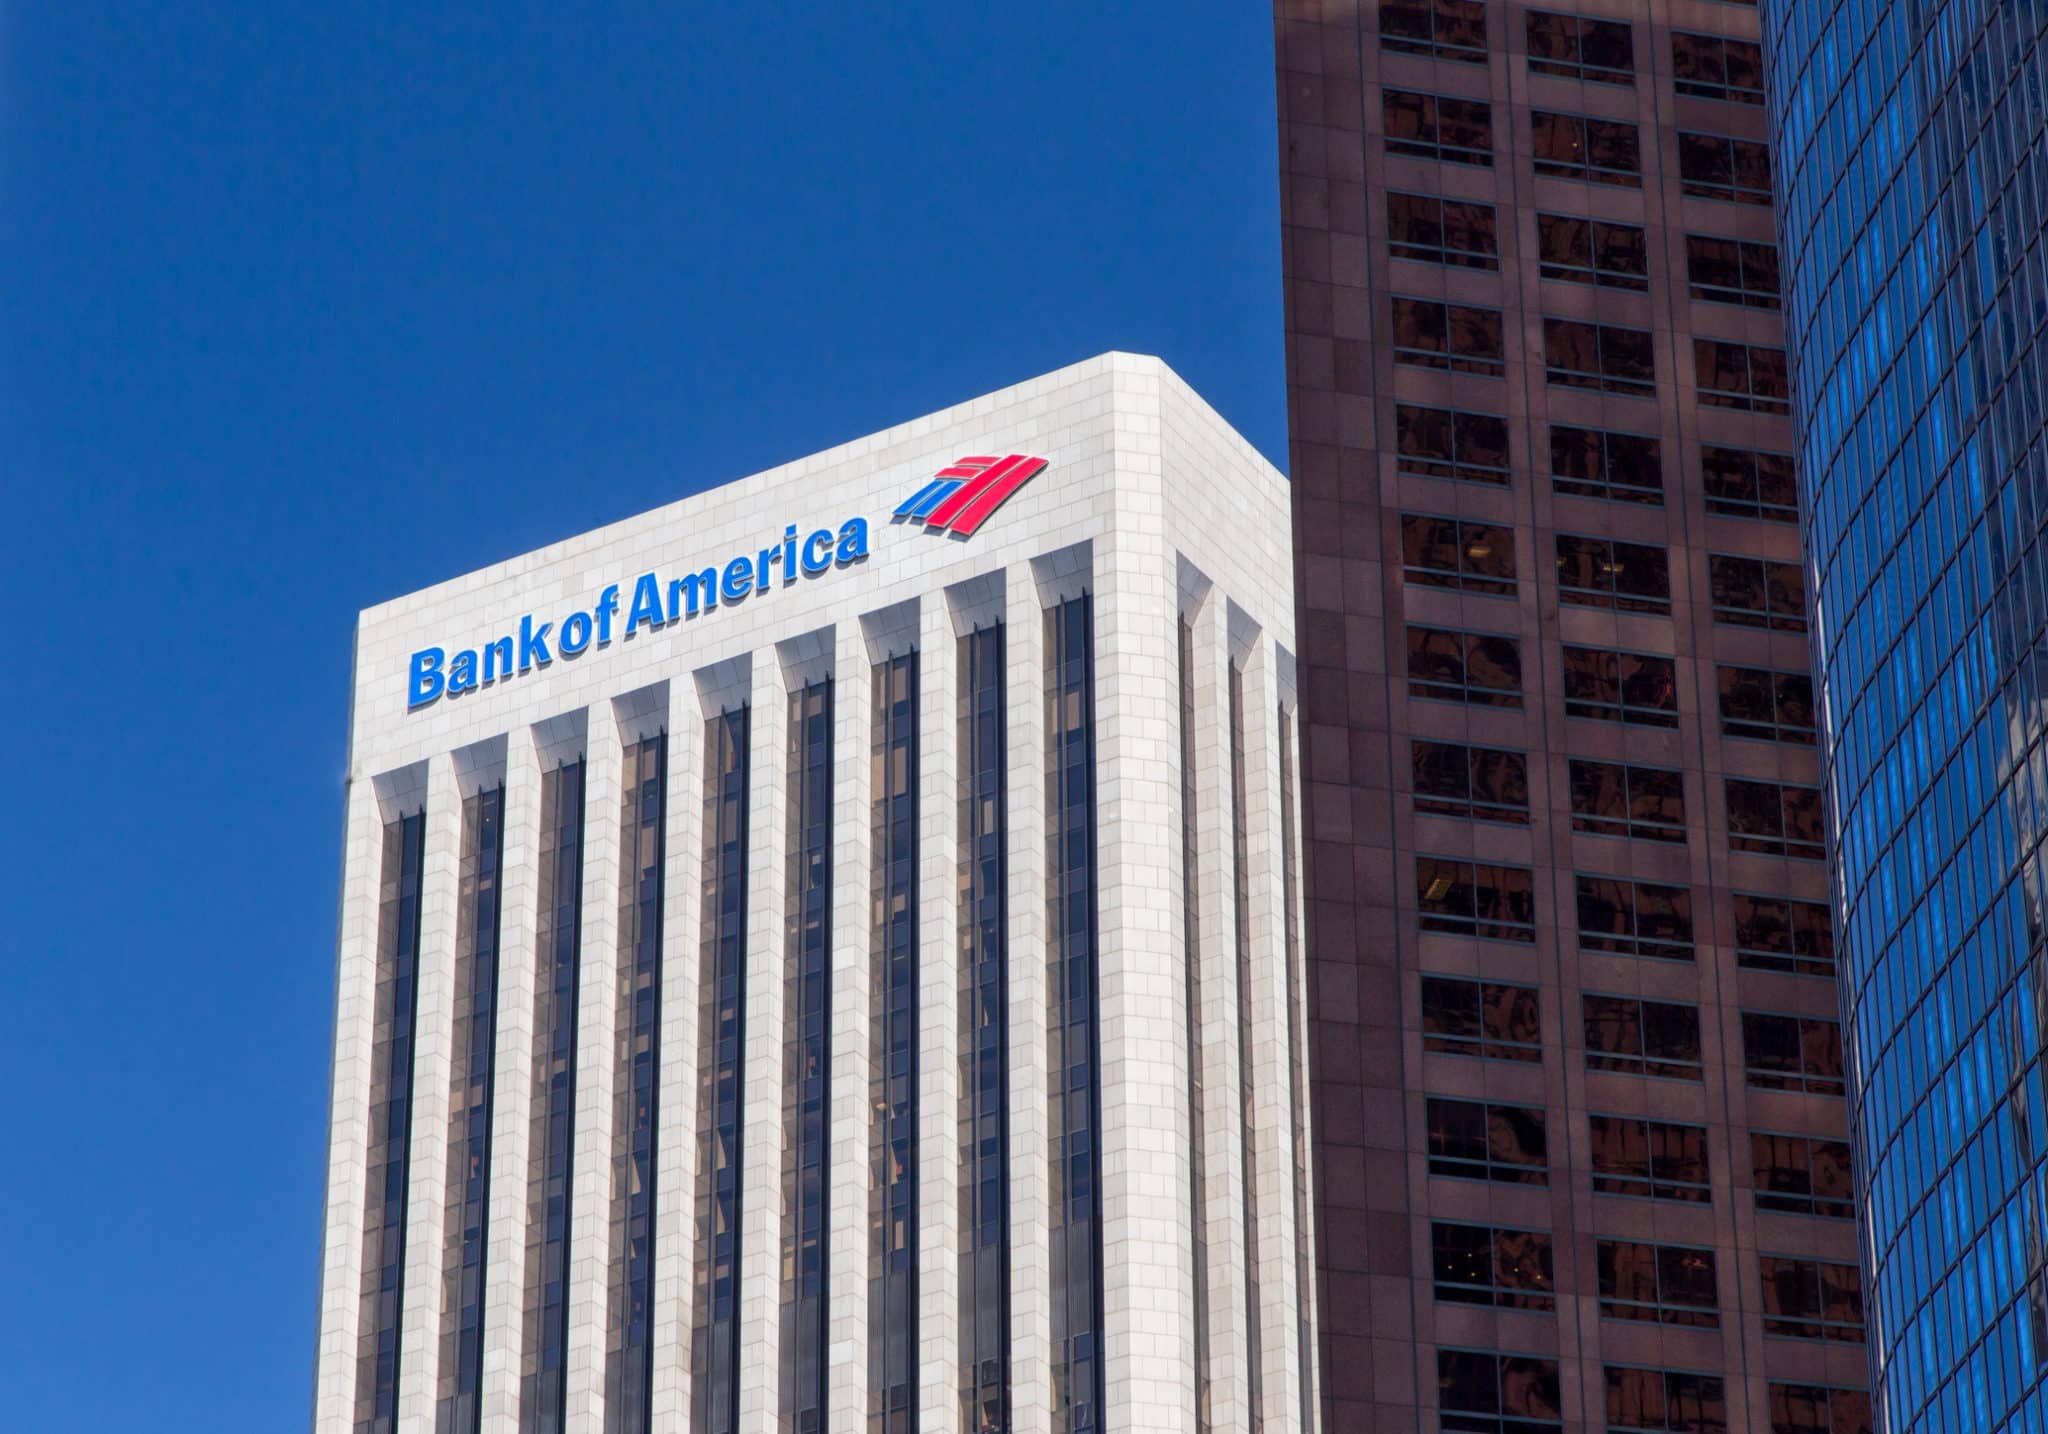 Bank of America trader, 25, reportedly died of cardiac arrest—less than a month after death of 35-year-old colleague